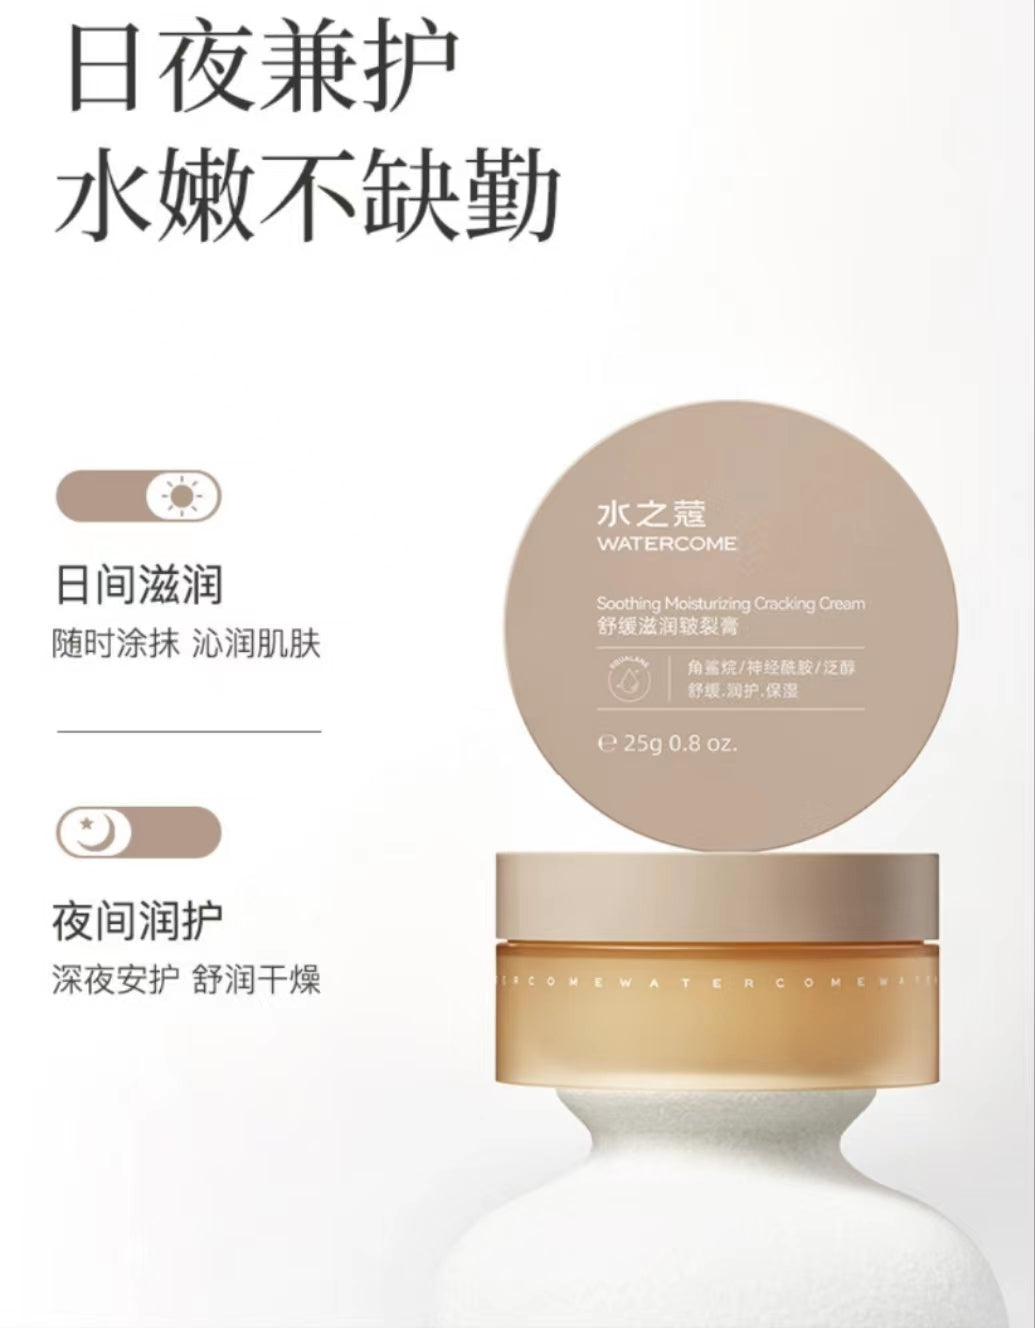 Watercome Soothing and Nourishing Cream for Cracked Skin 25g 水之蔻舒缓滋润皲裂膏